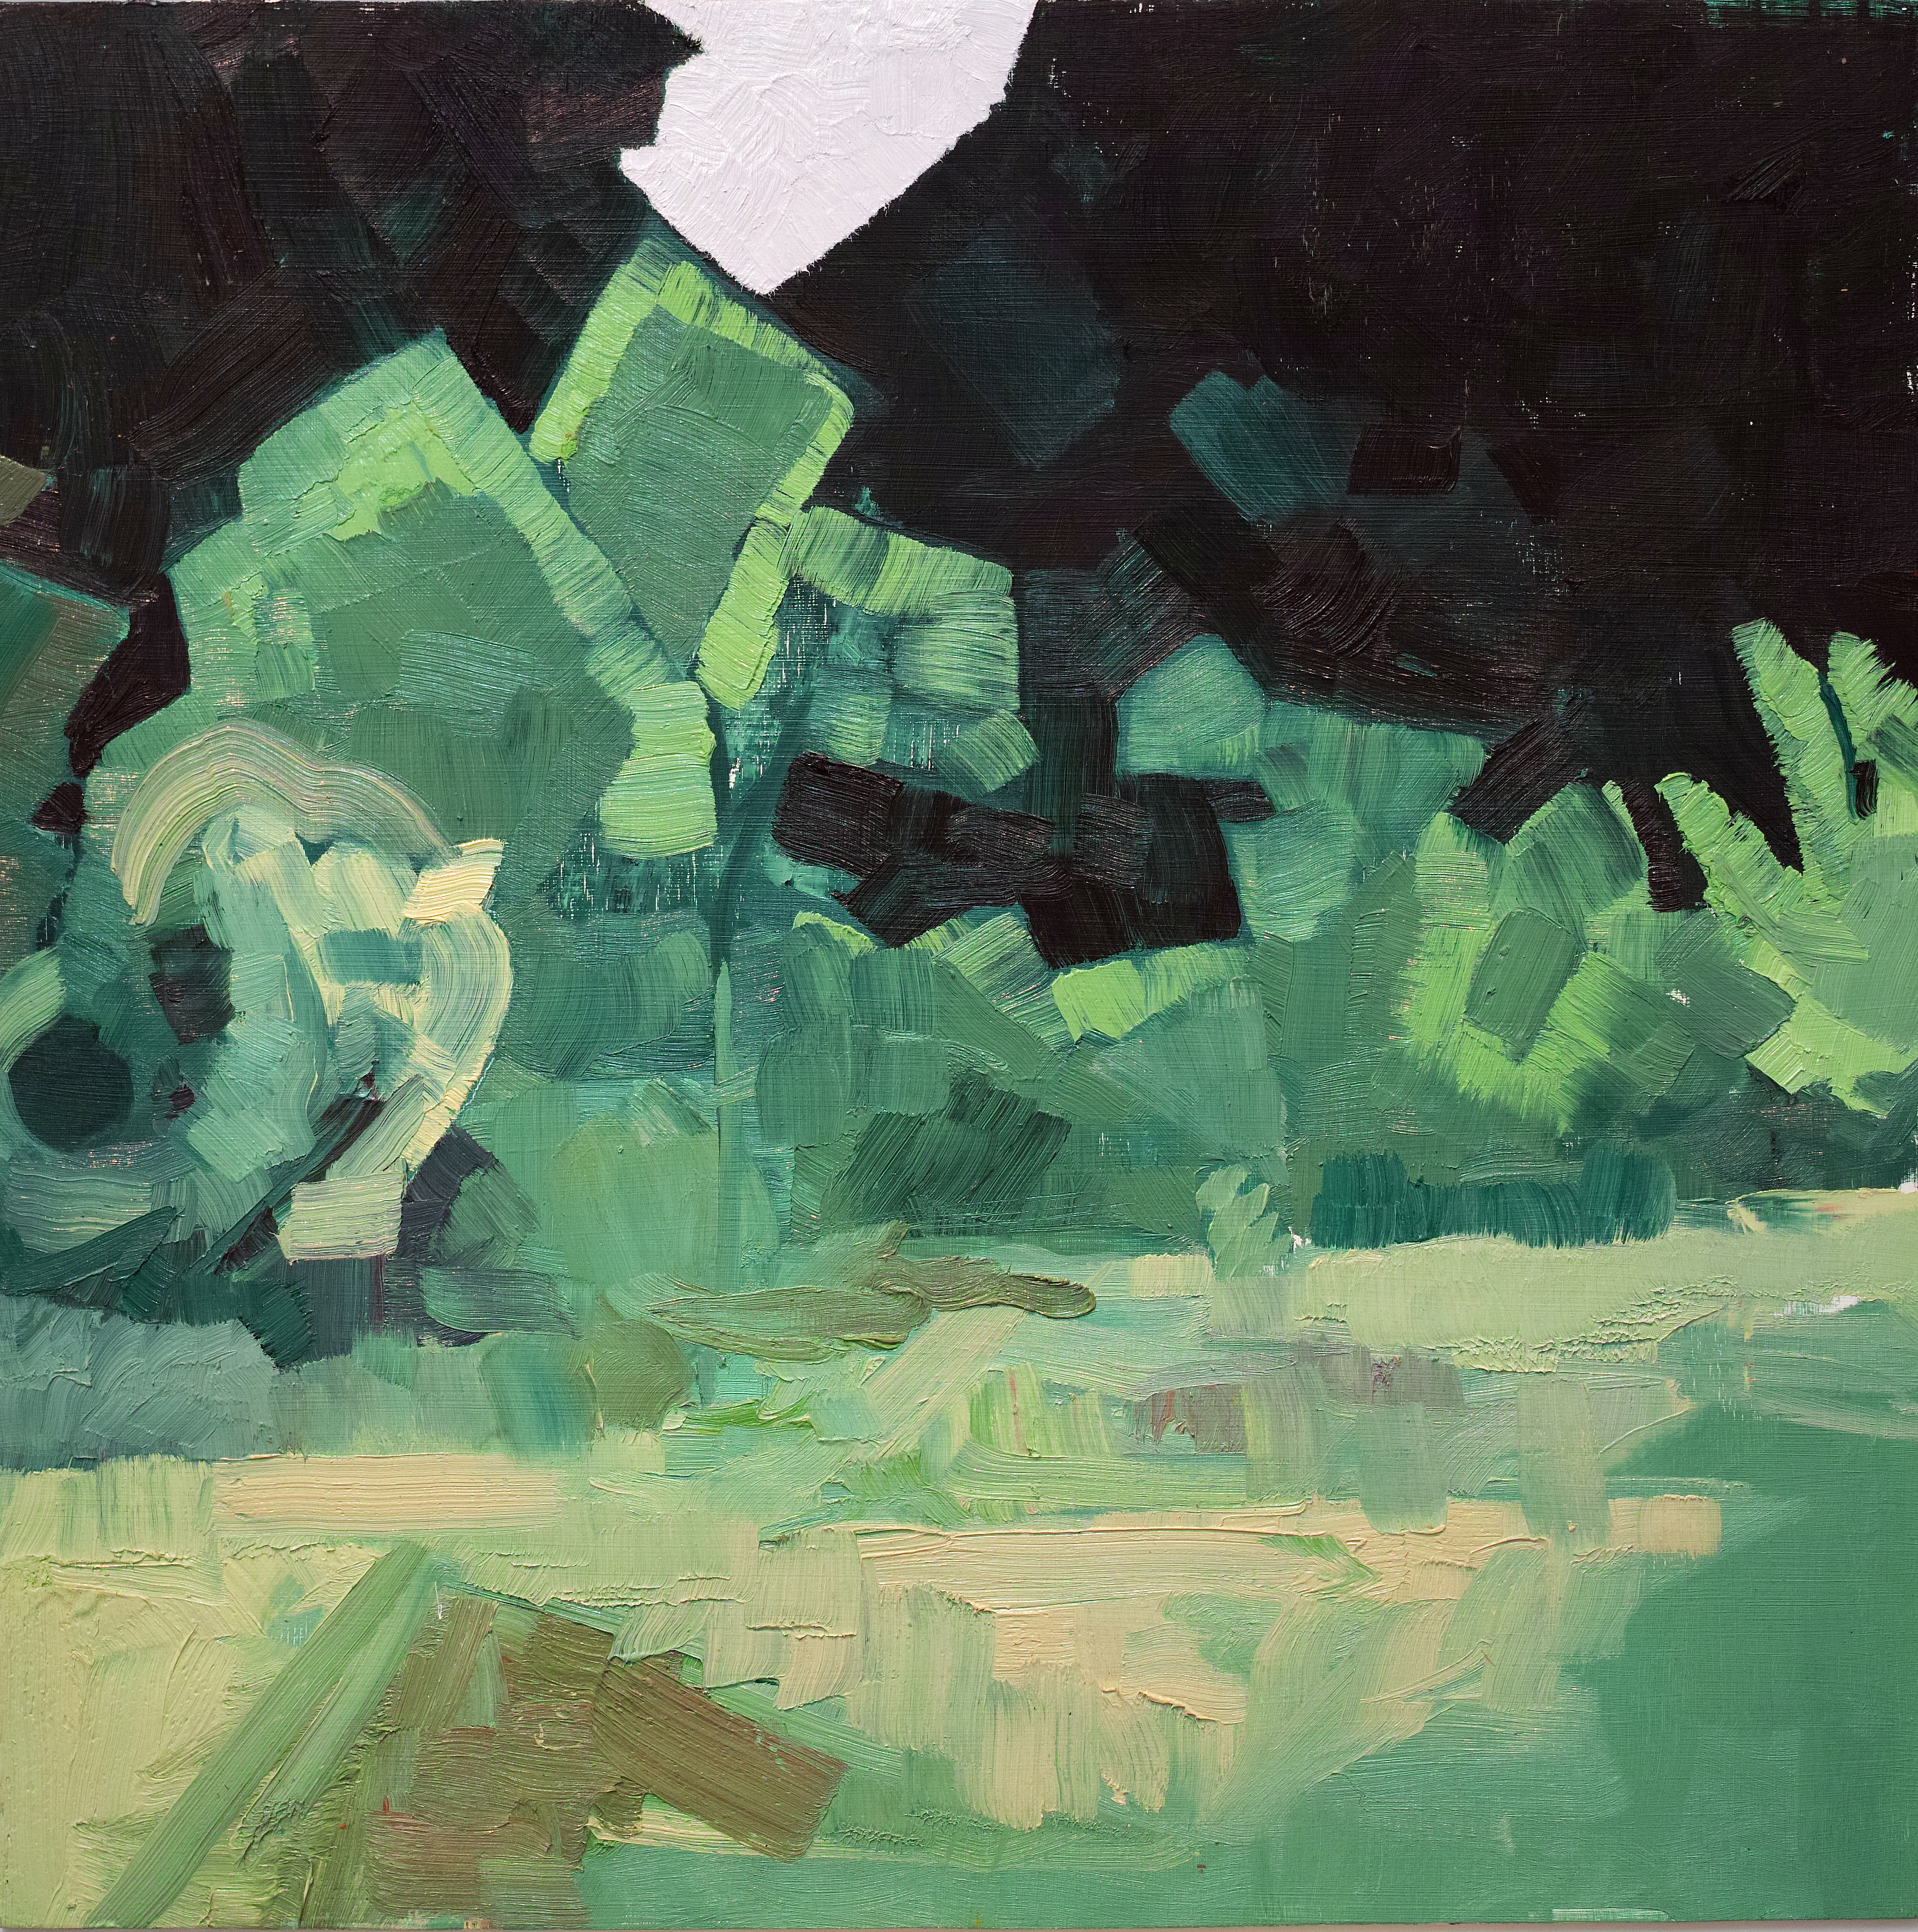 Mayville Up Close, 1991, oil on plywood, 24 x 24 inches